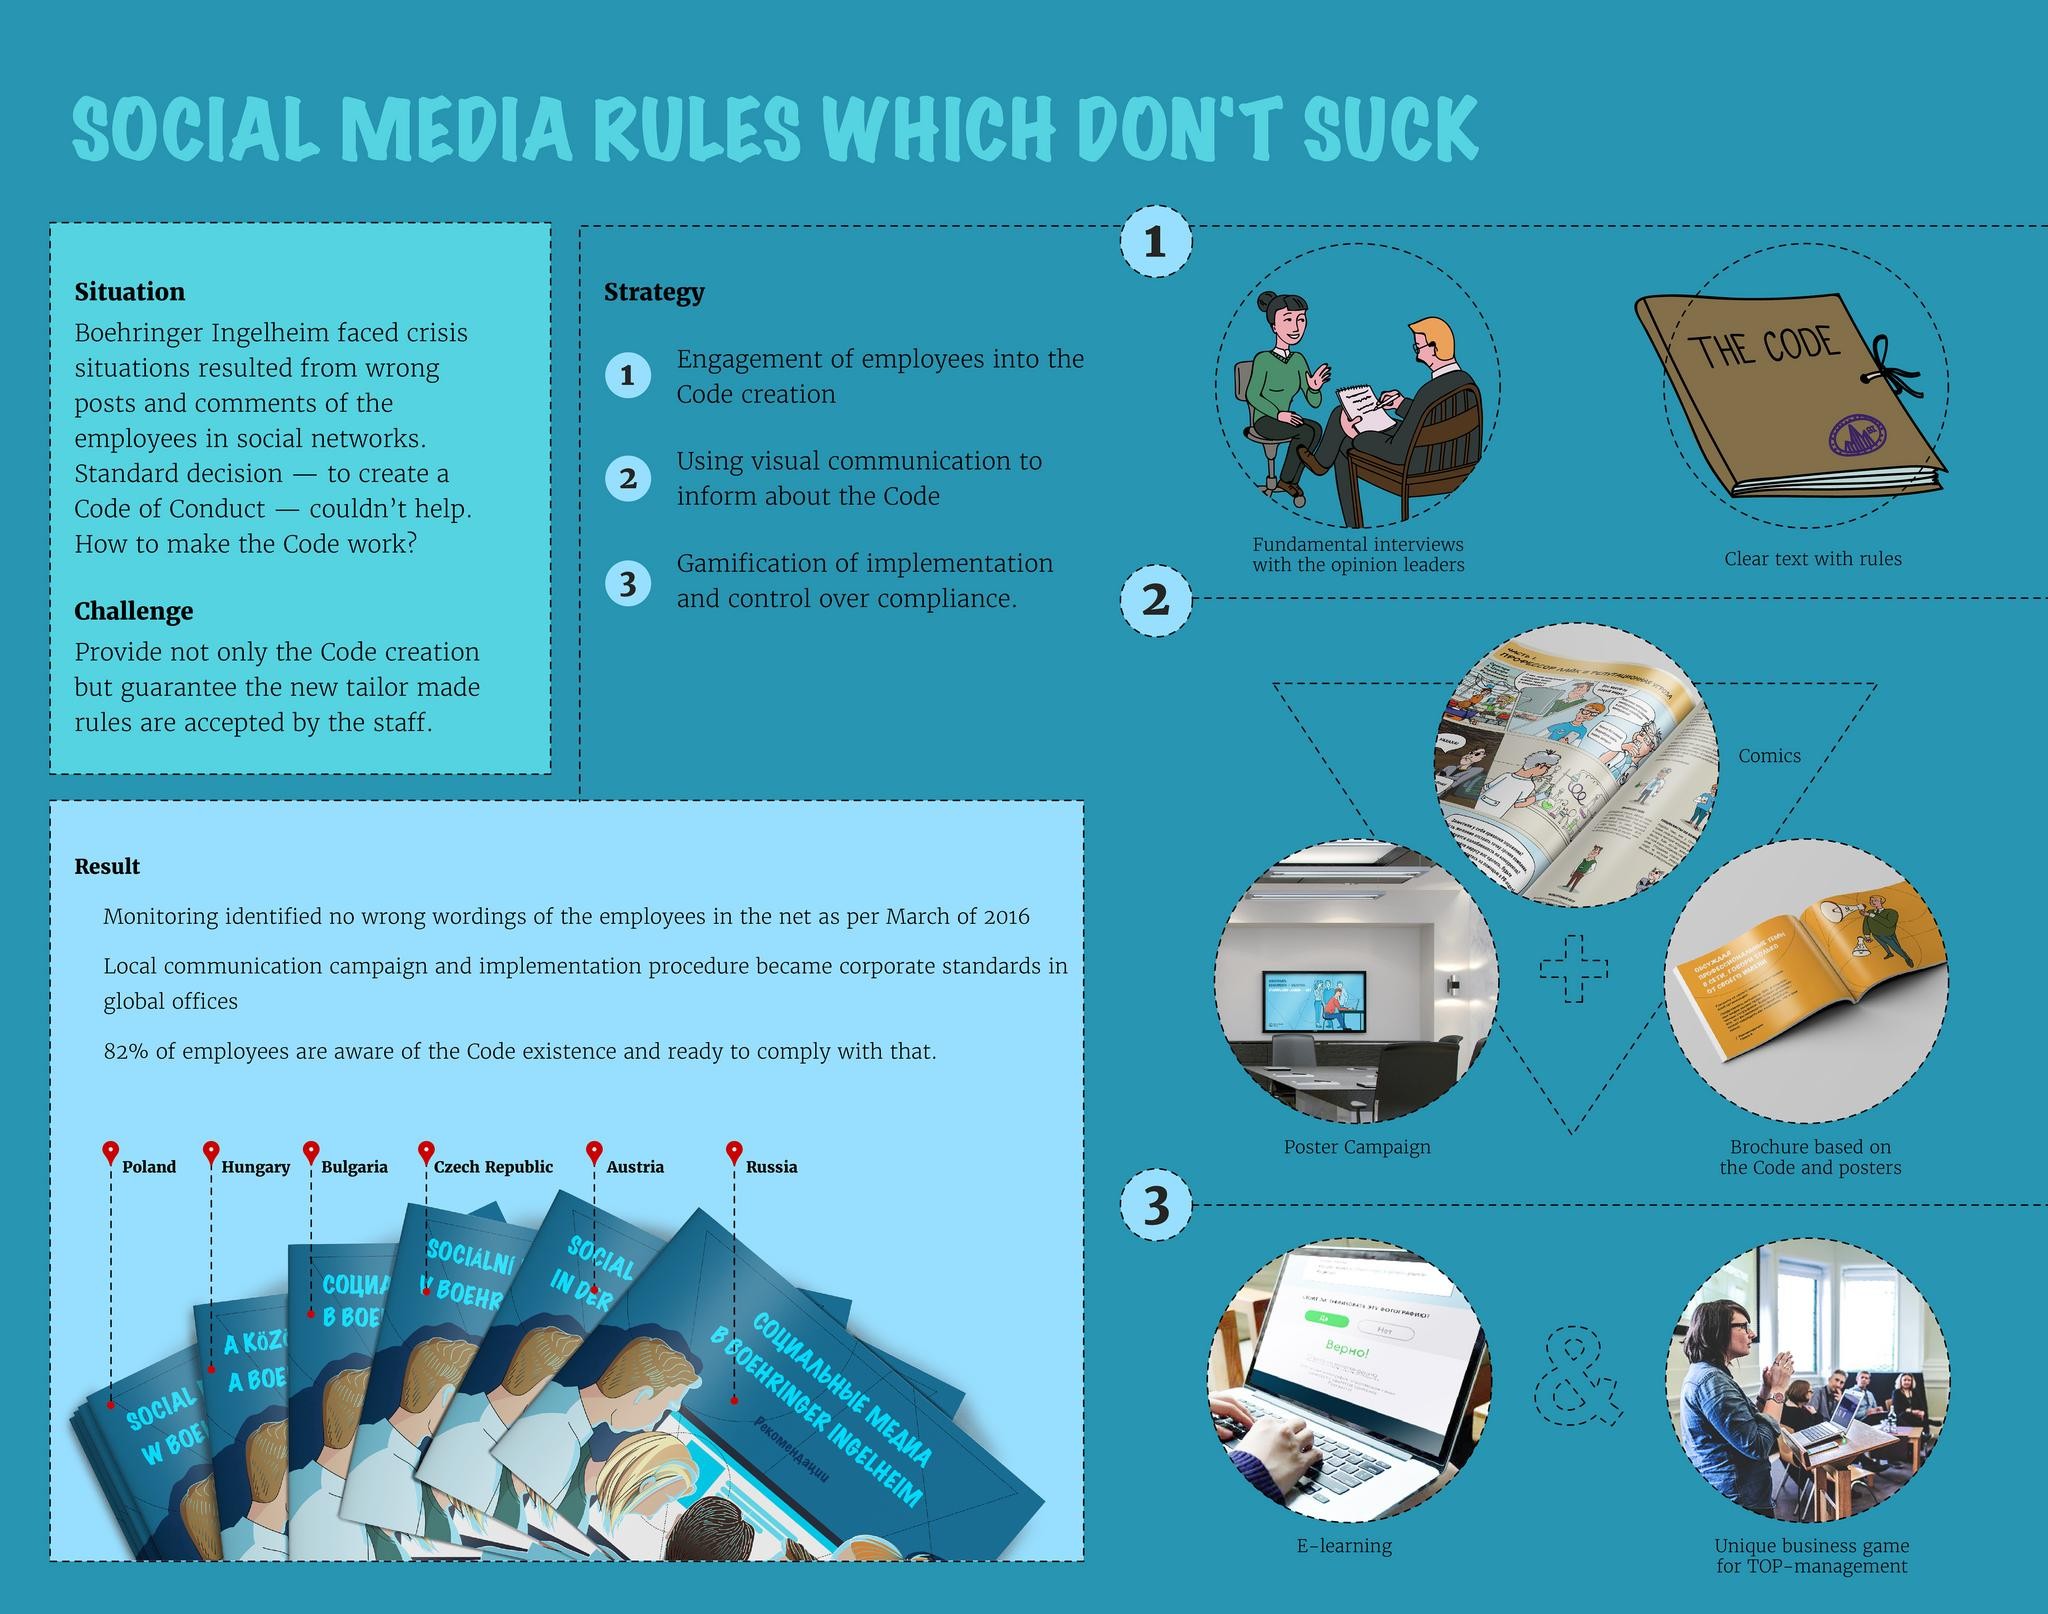 Social media rules which don't suck